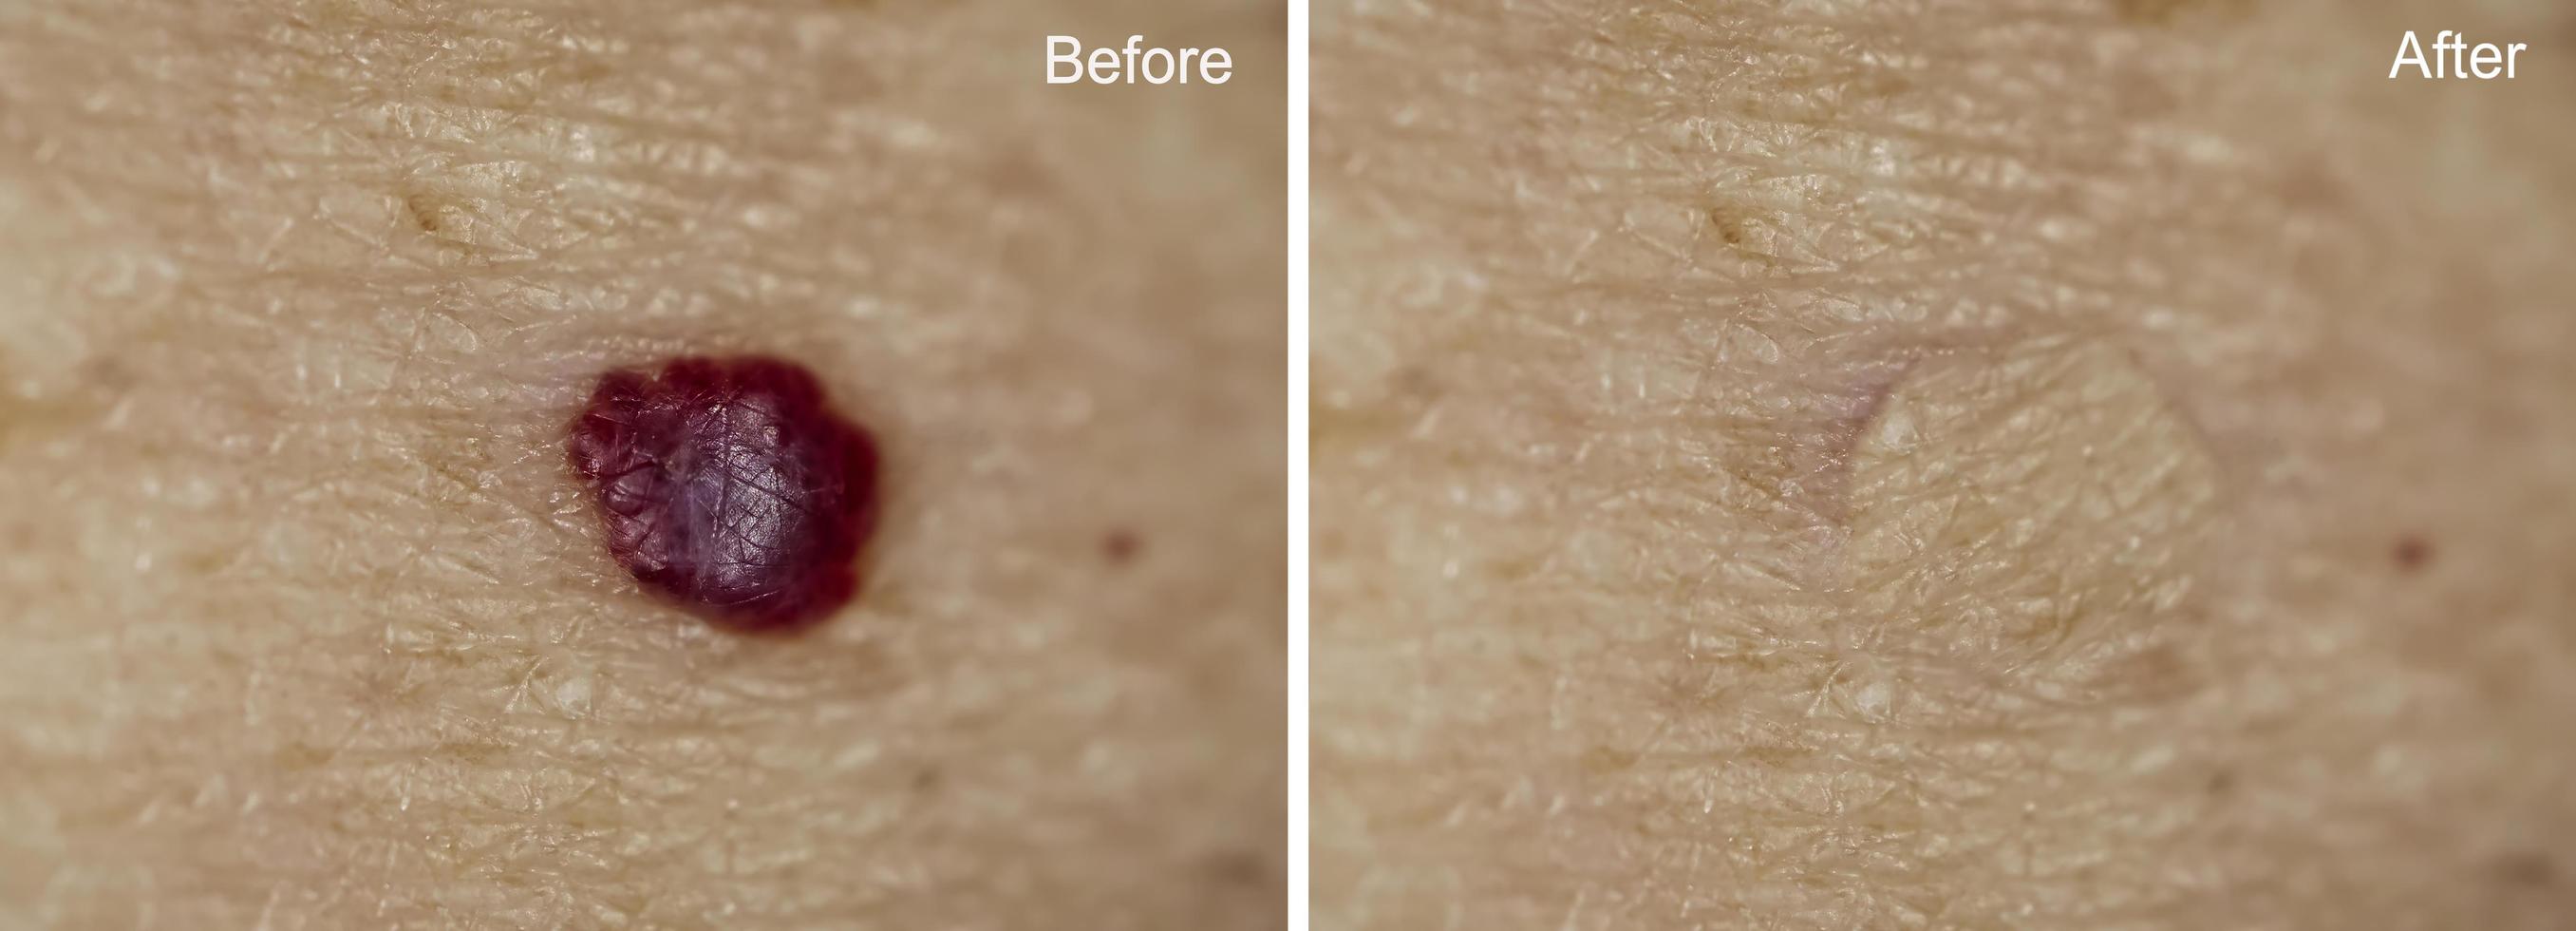 Photo before and after removal of mole on woman skin. Mole removal concept